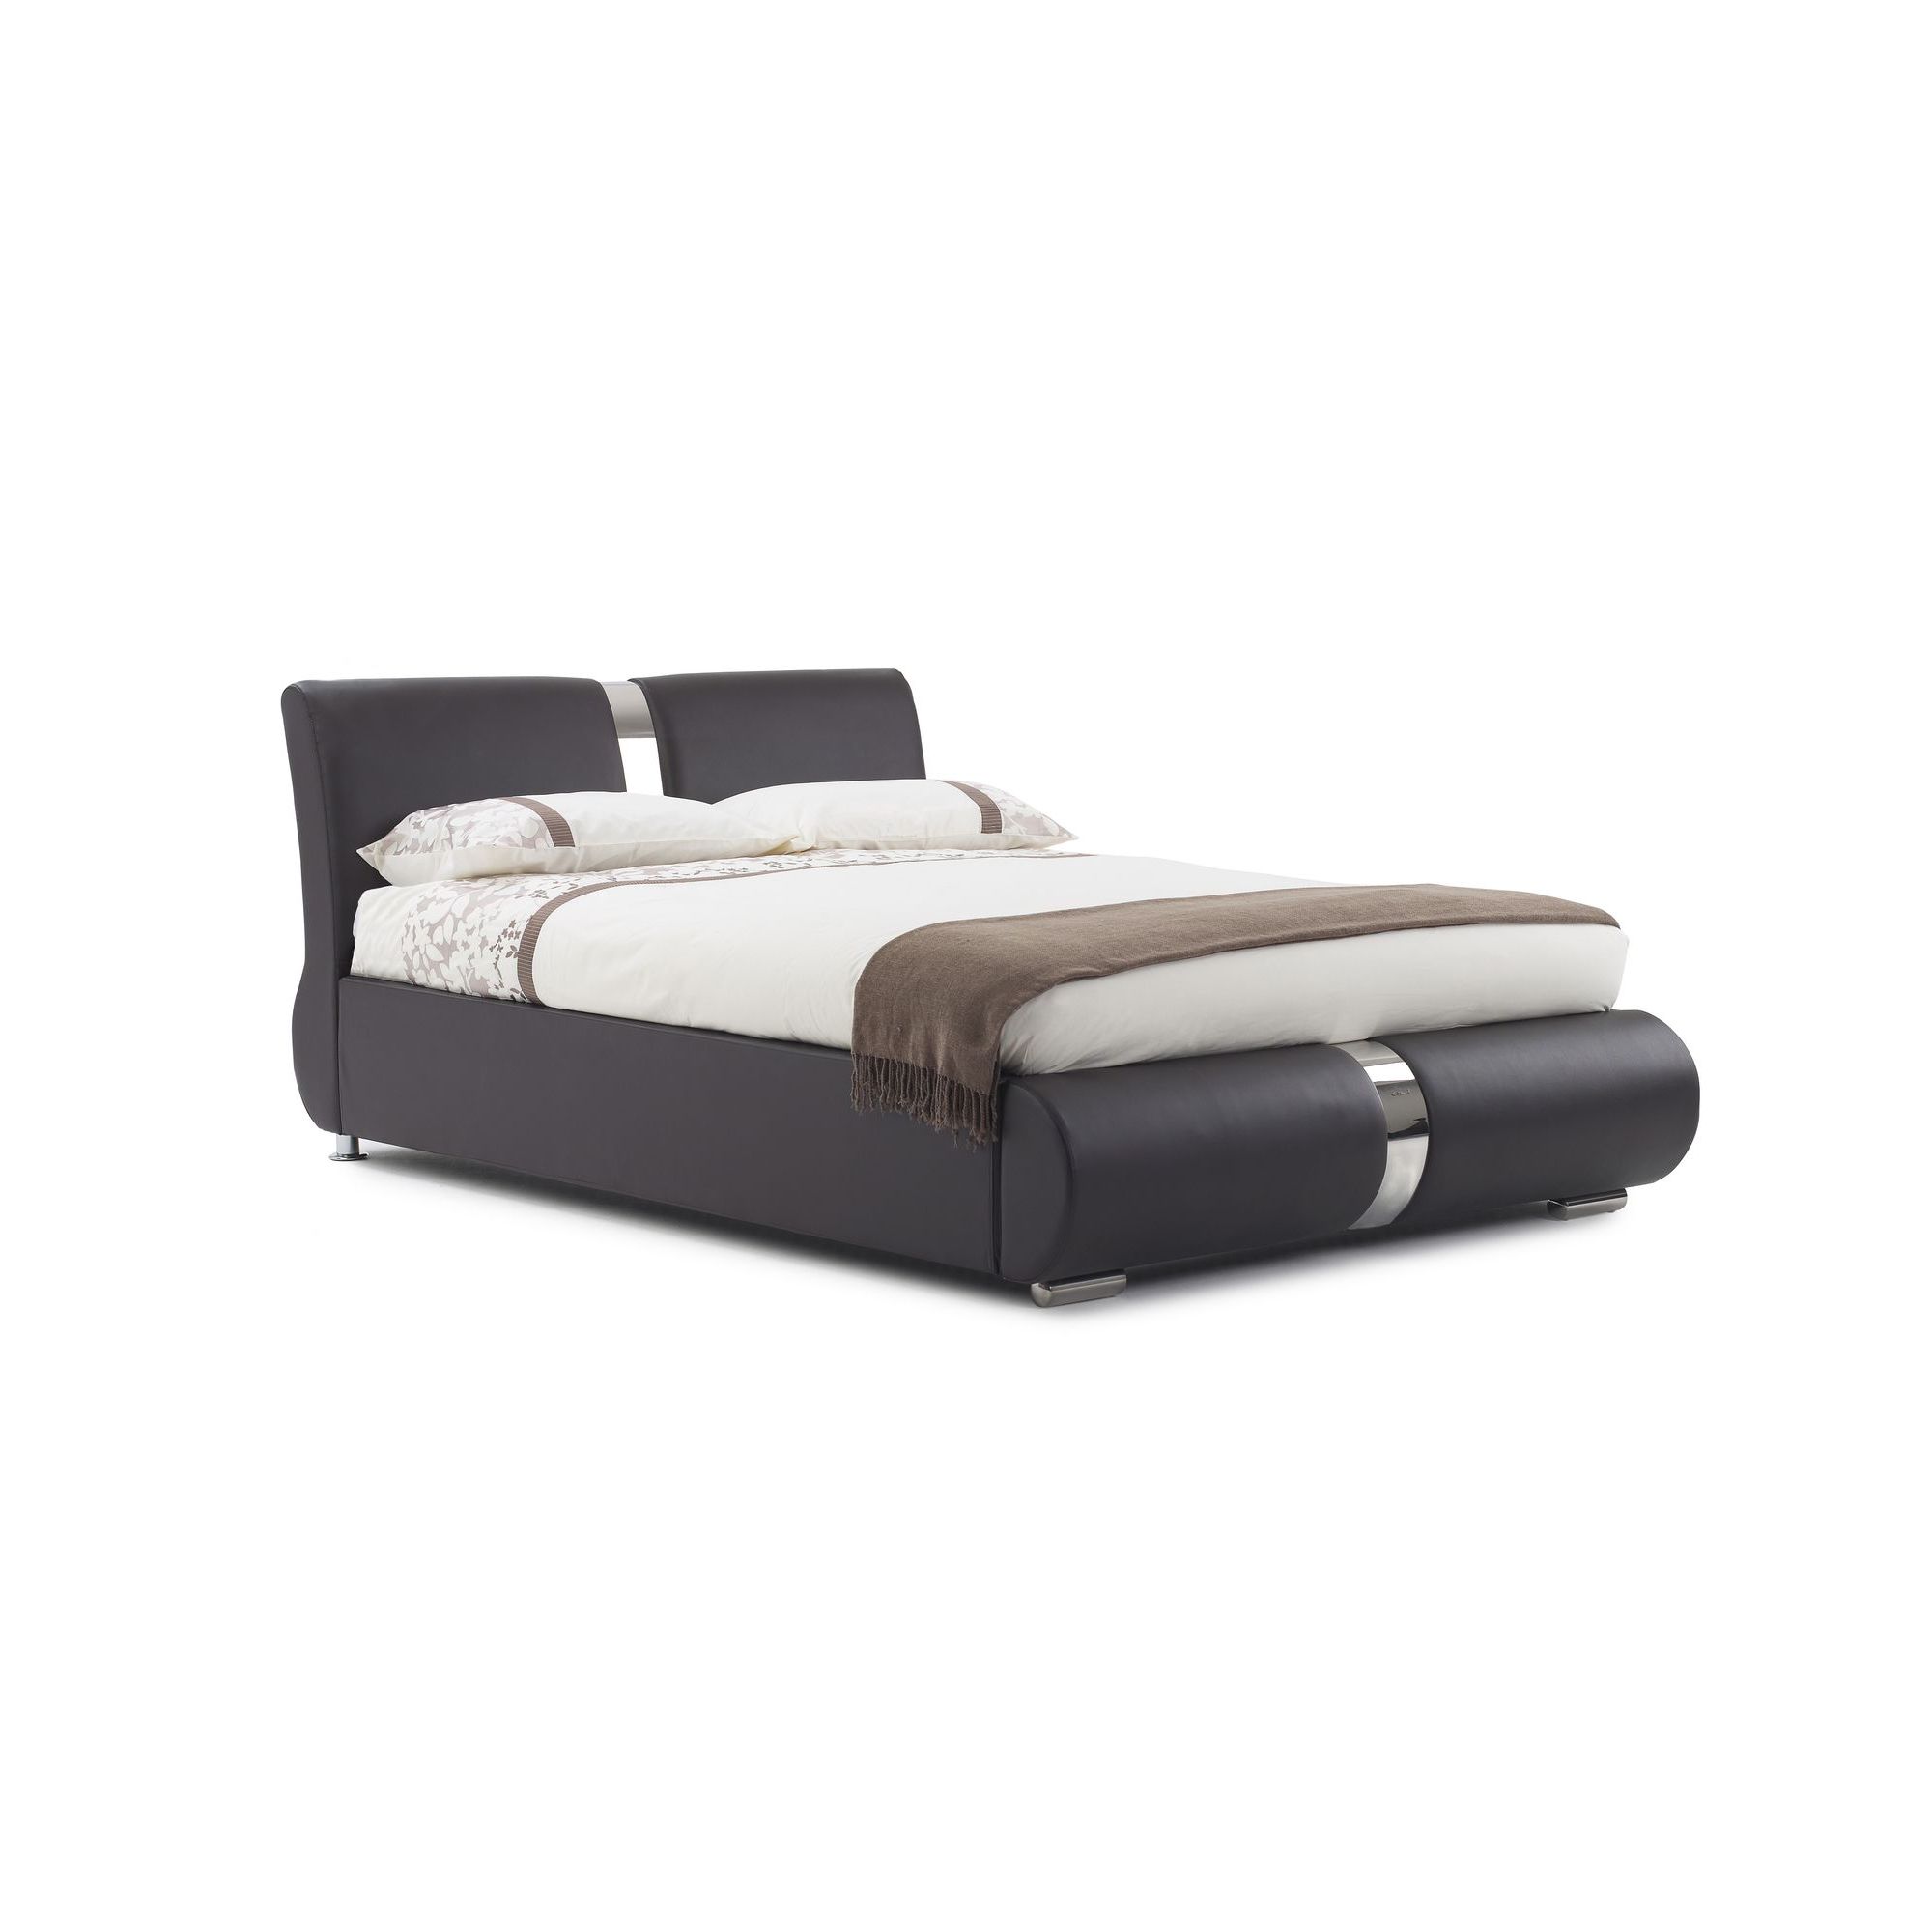 Frank Bosworth Milan Leather Bed - Double - Brown at Tescos Direct